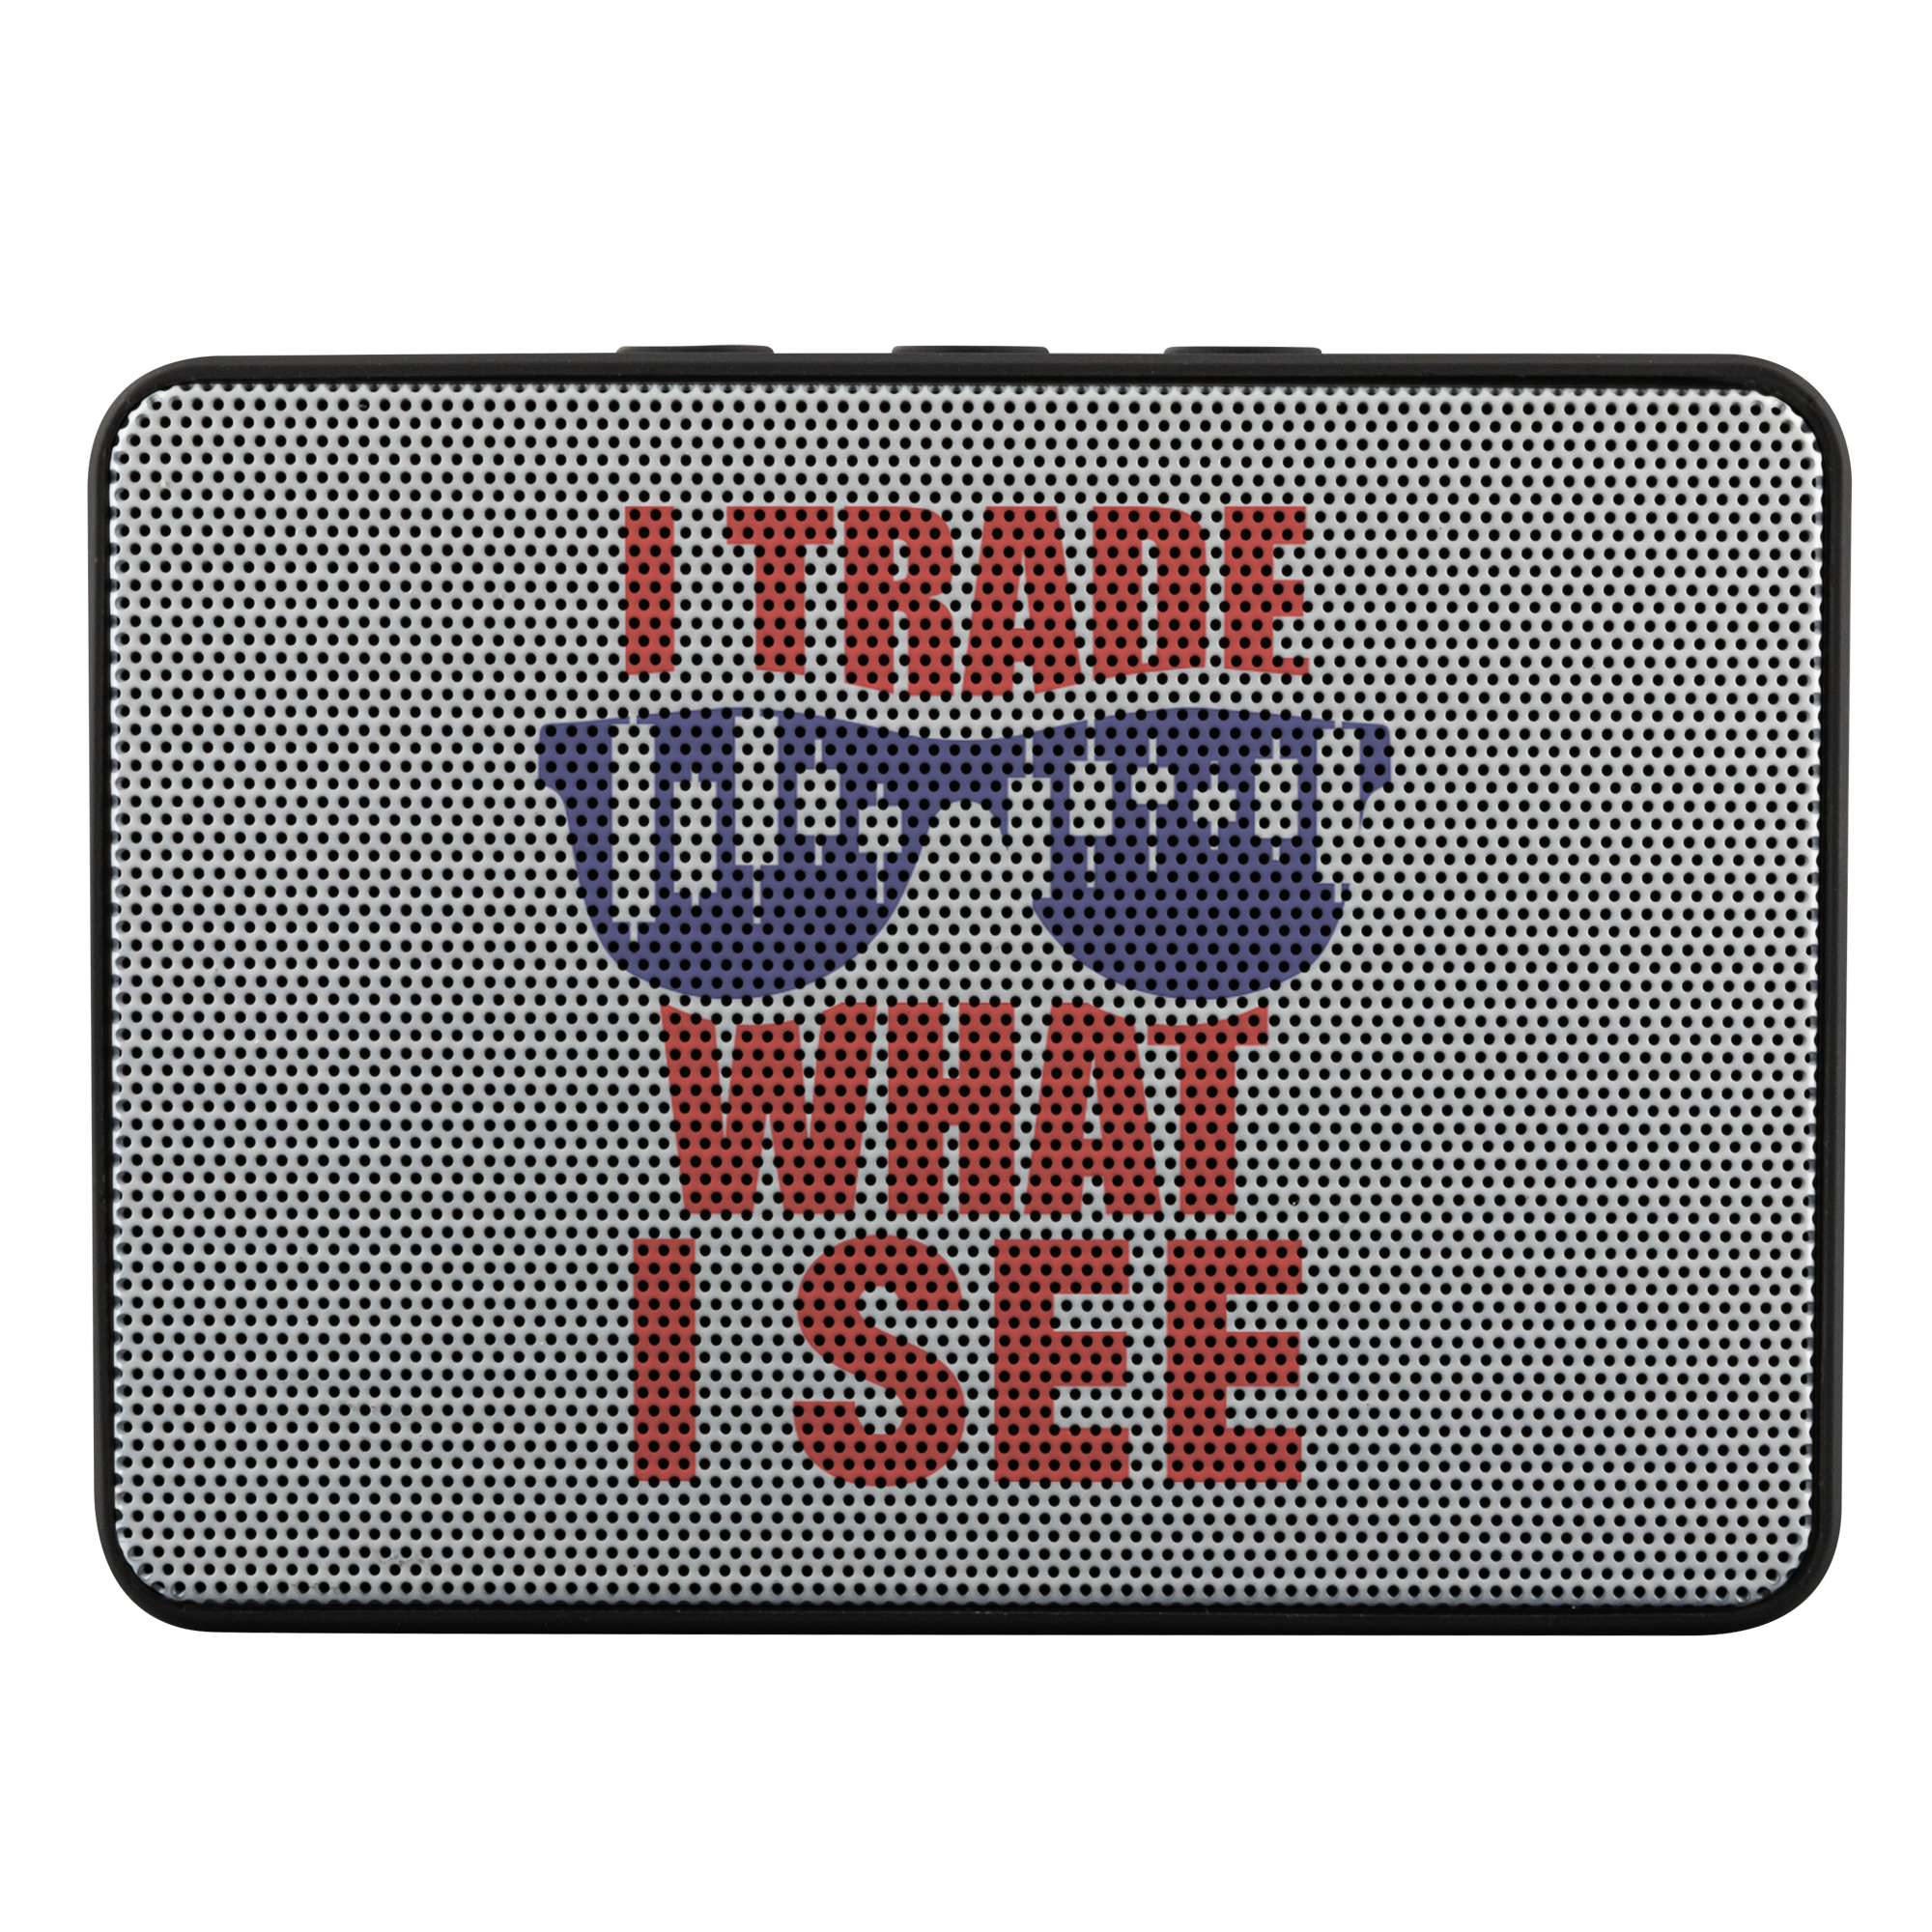 Bluetooth Speaker - Trade What I See